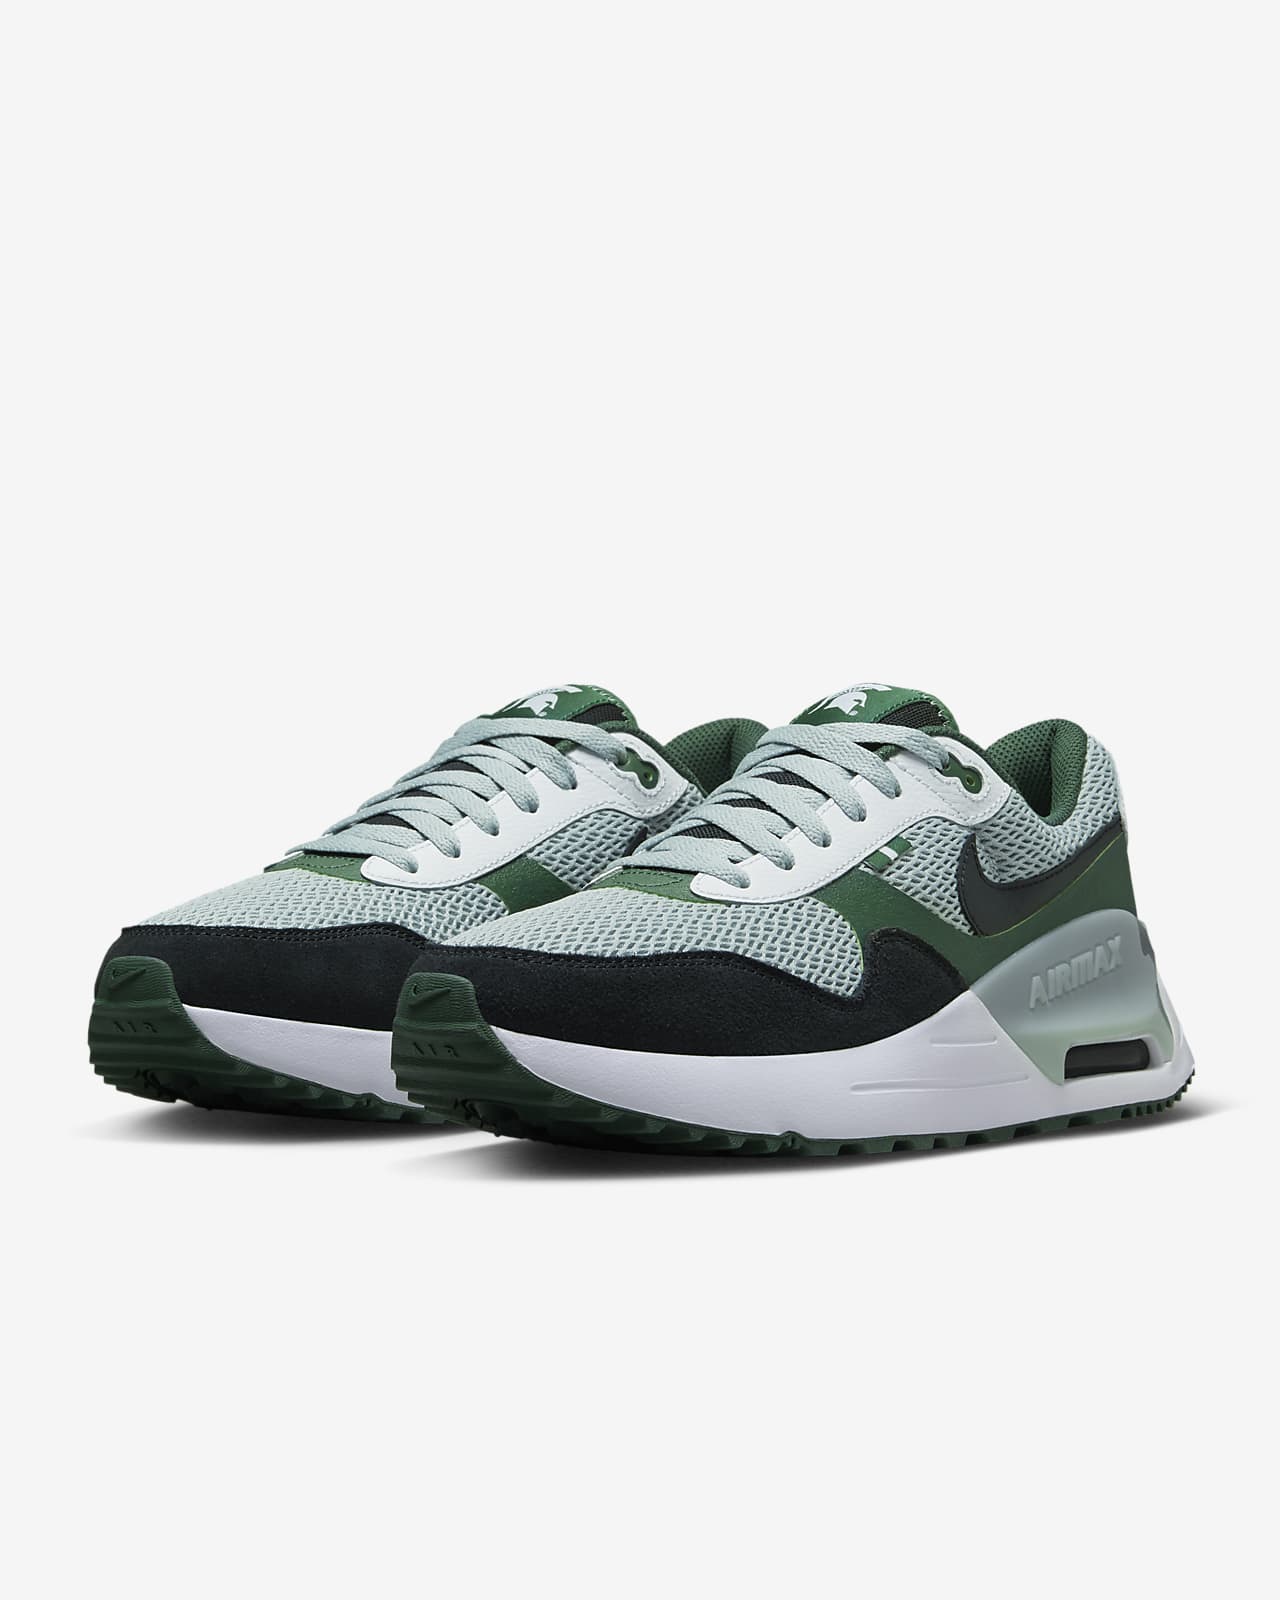 College Air Max SYSTM (Michigan State) Shoes.